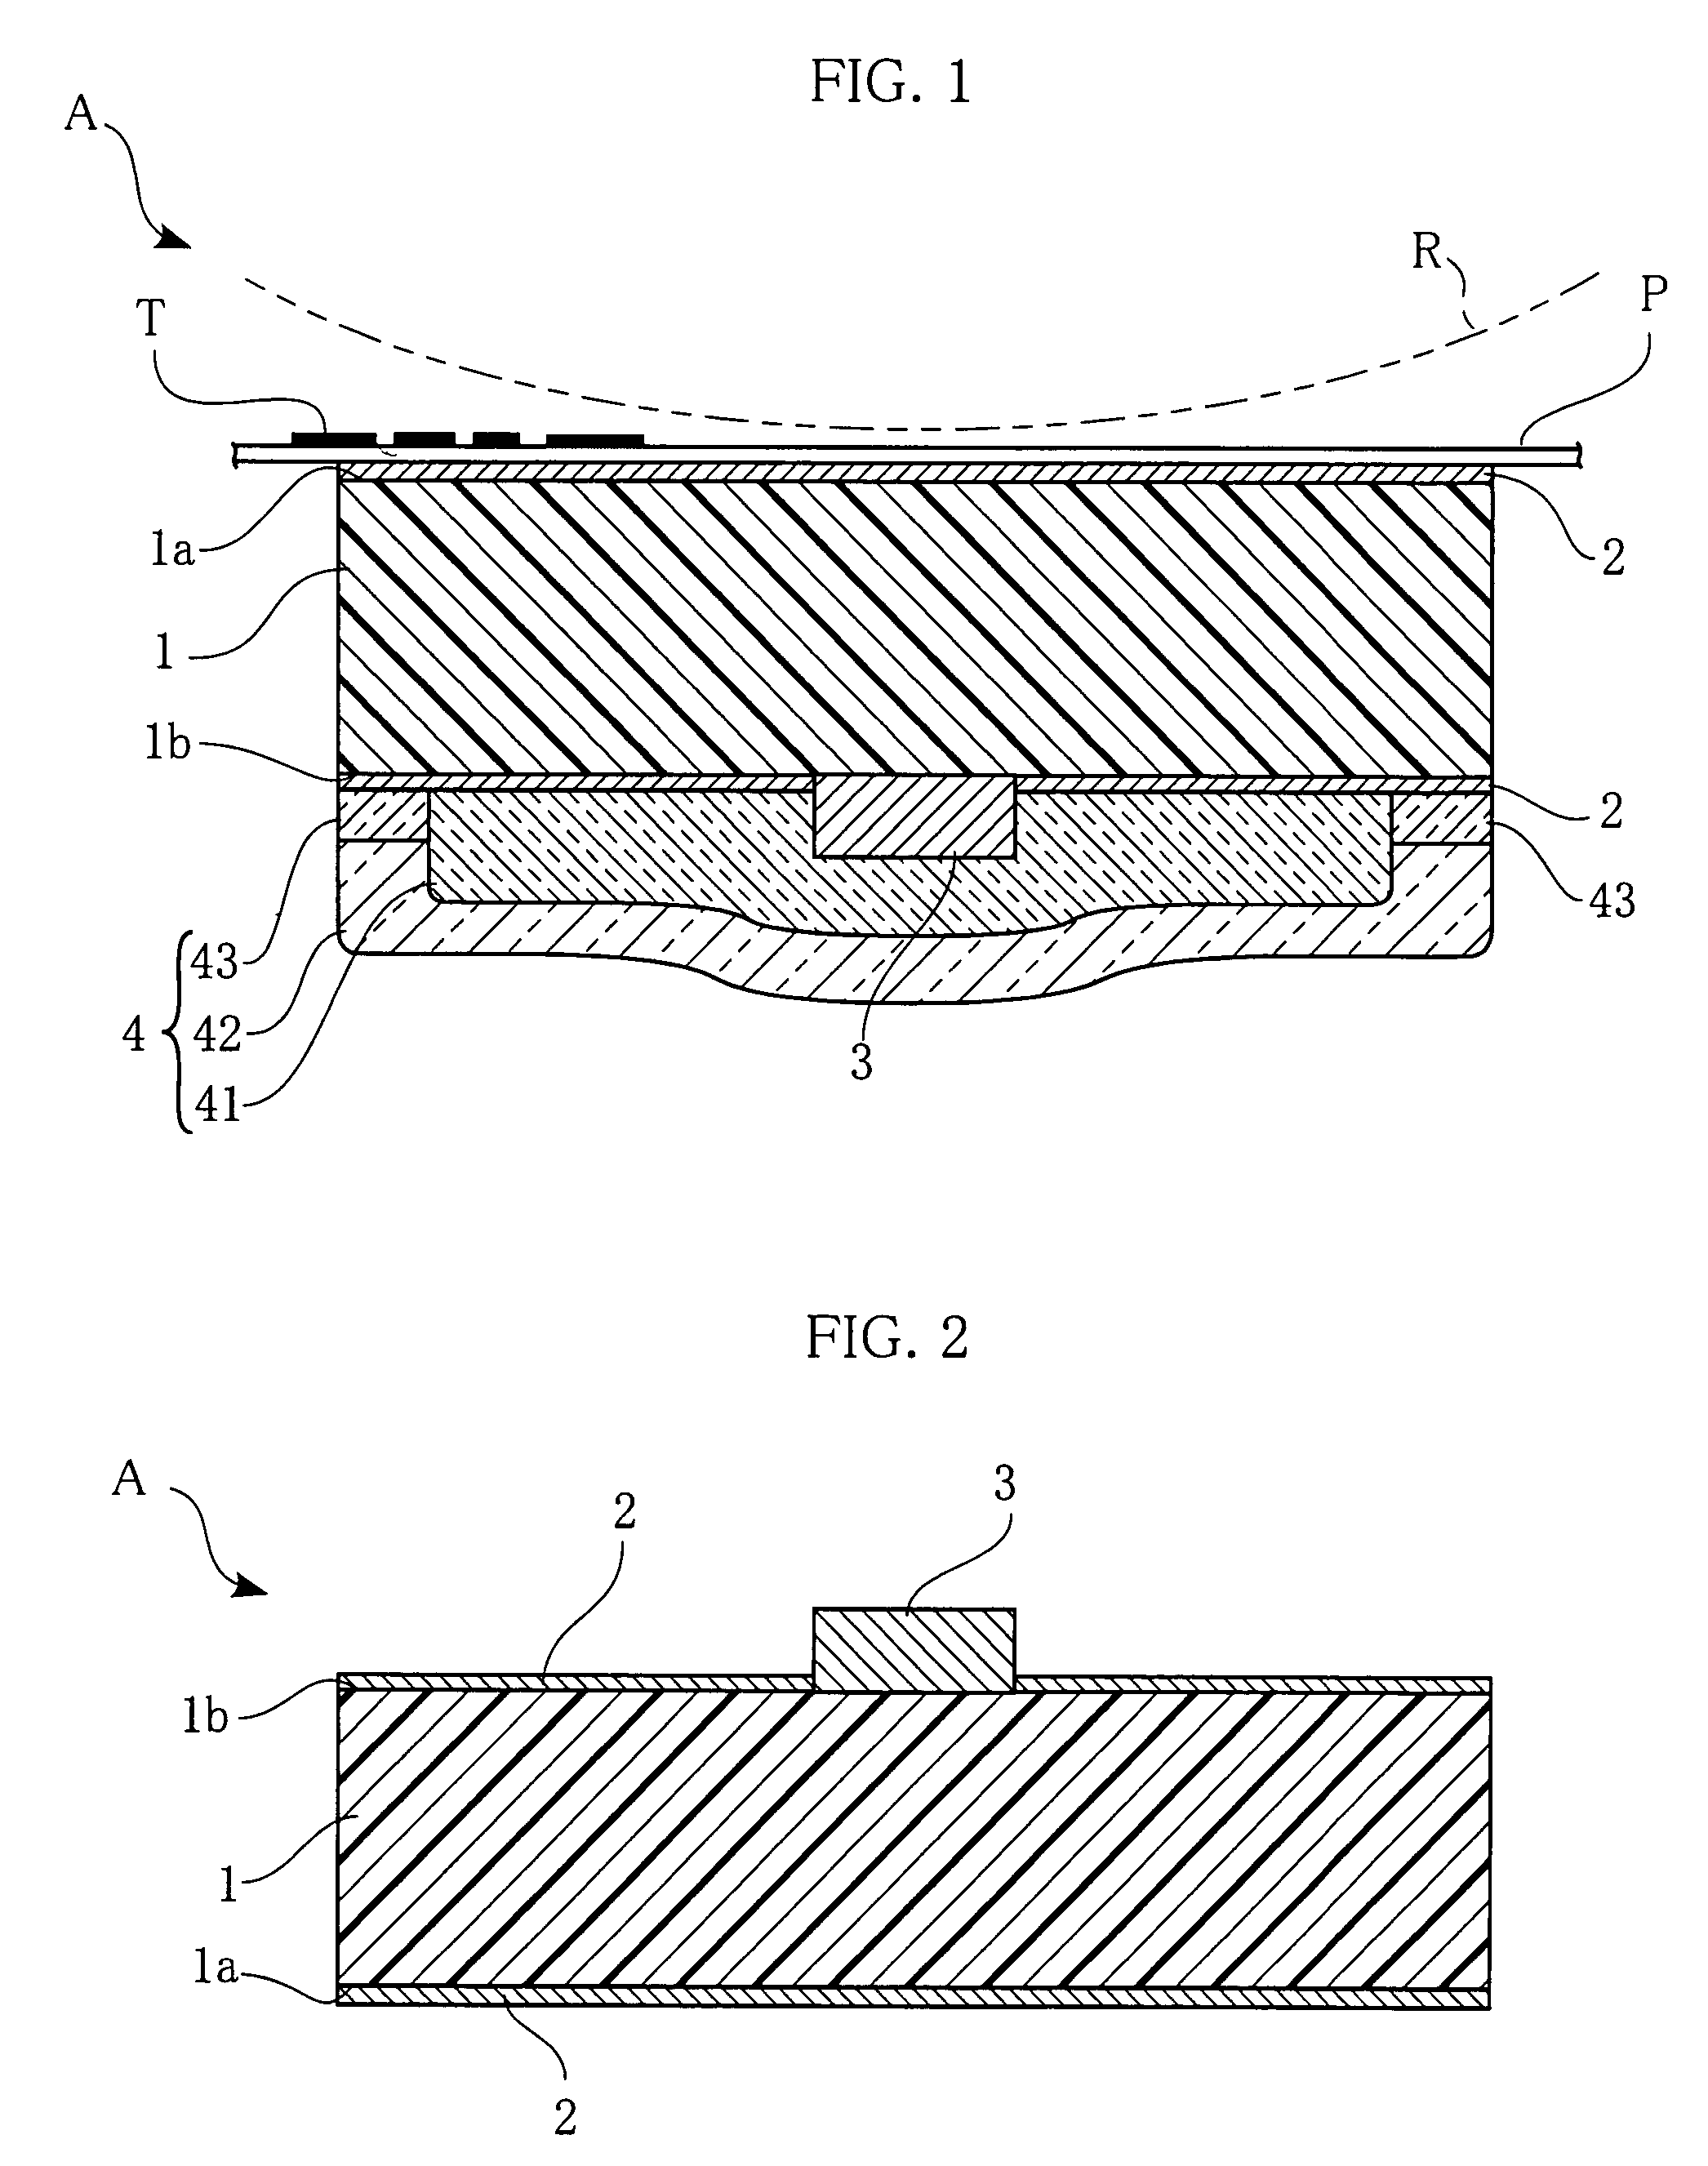 Heating unit and method of making the same